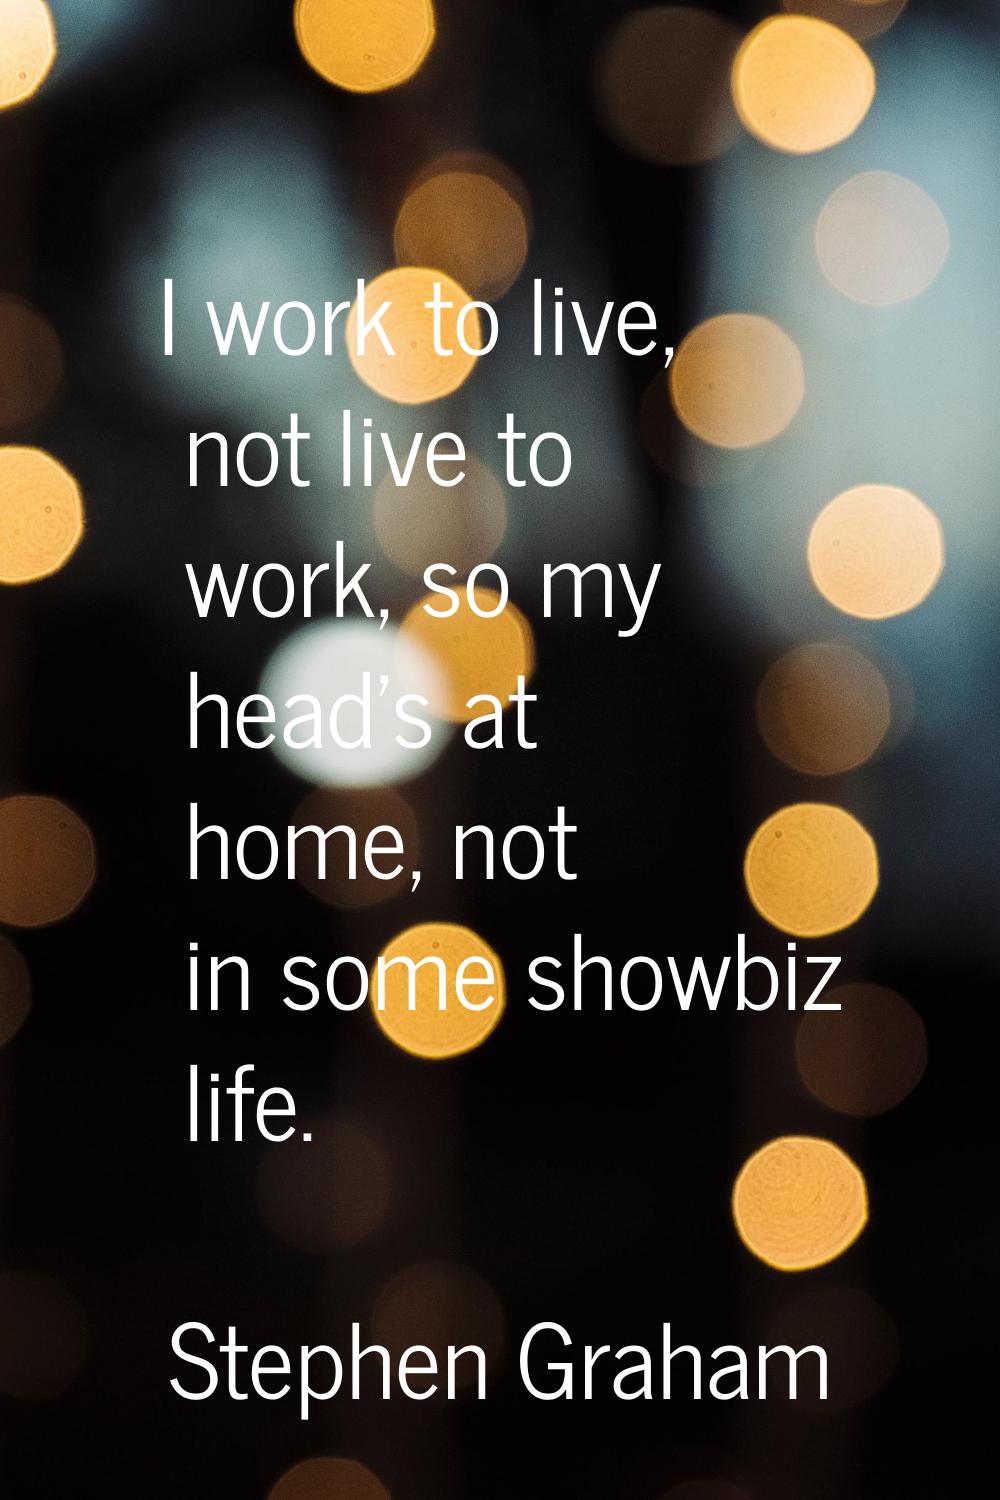 I work to live, not live to work, so my head's at home, not in some showbiz life.